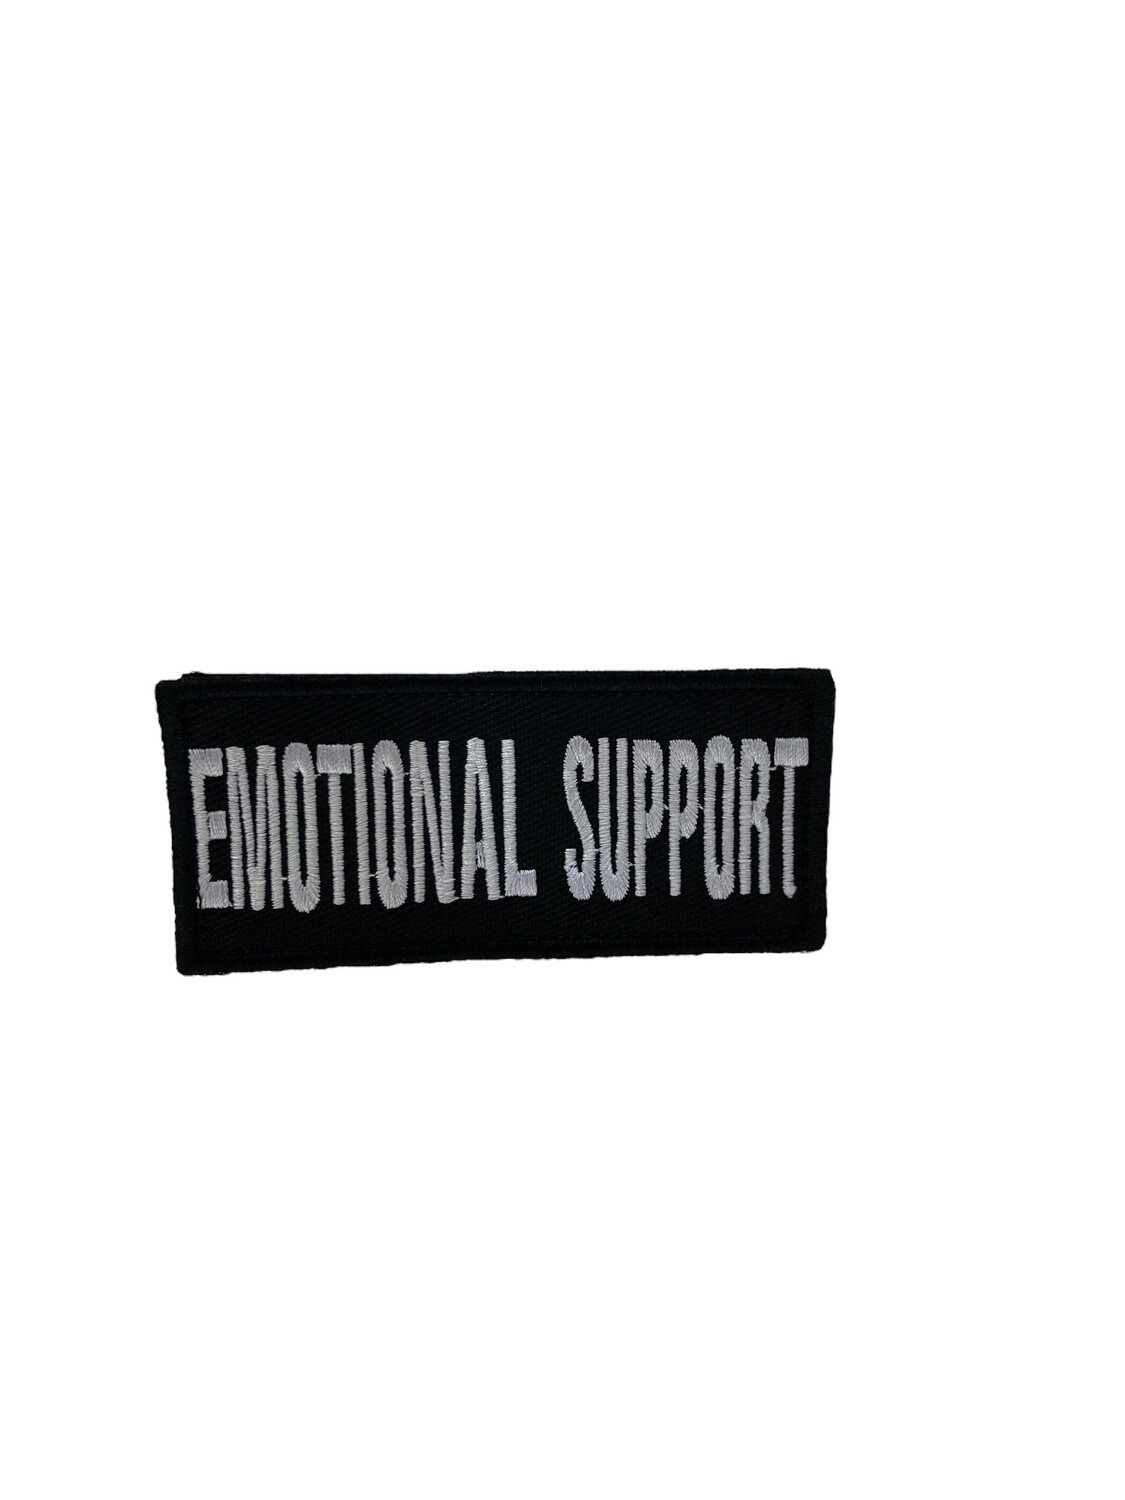 Patches Emotional Support Black / White